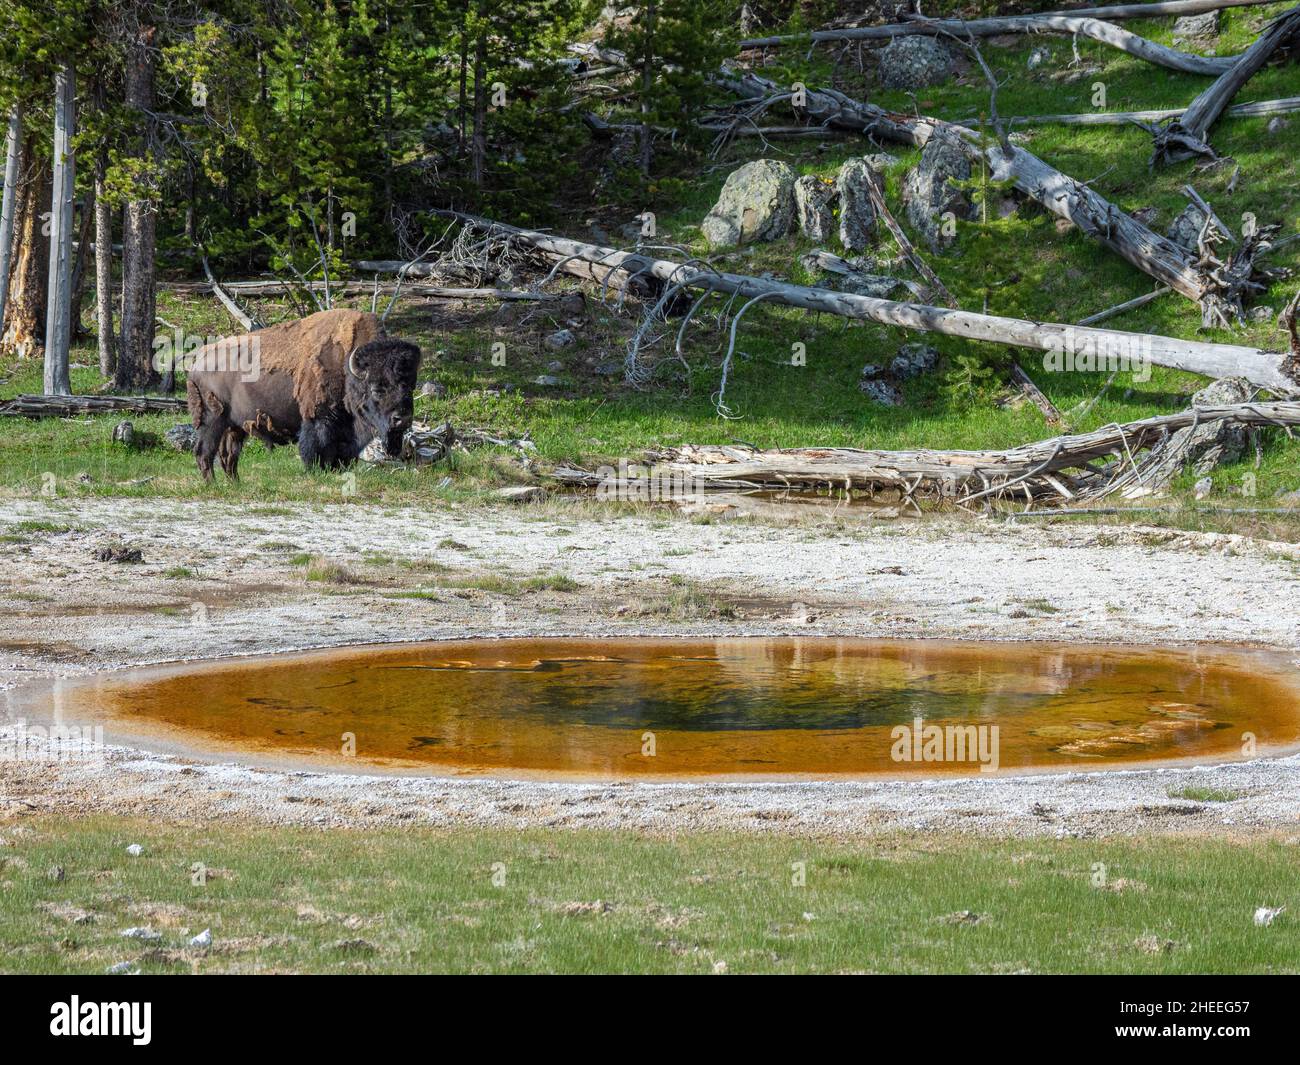 Adult bison, Bison bison, near a boiling pot in Yellowstone National Park, Wyoming. Stock Photo